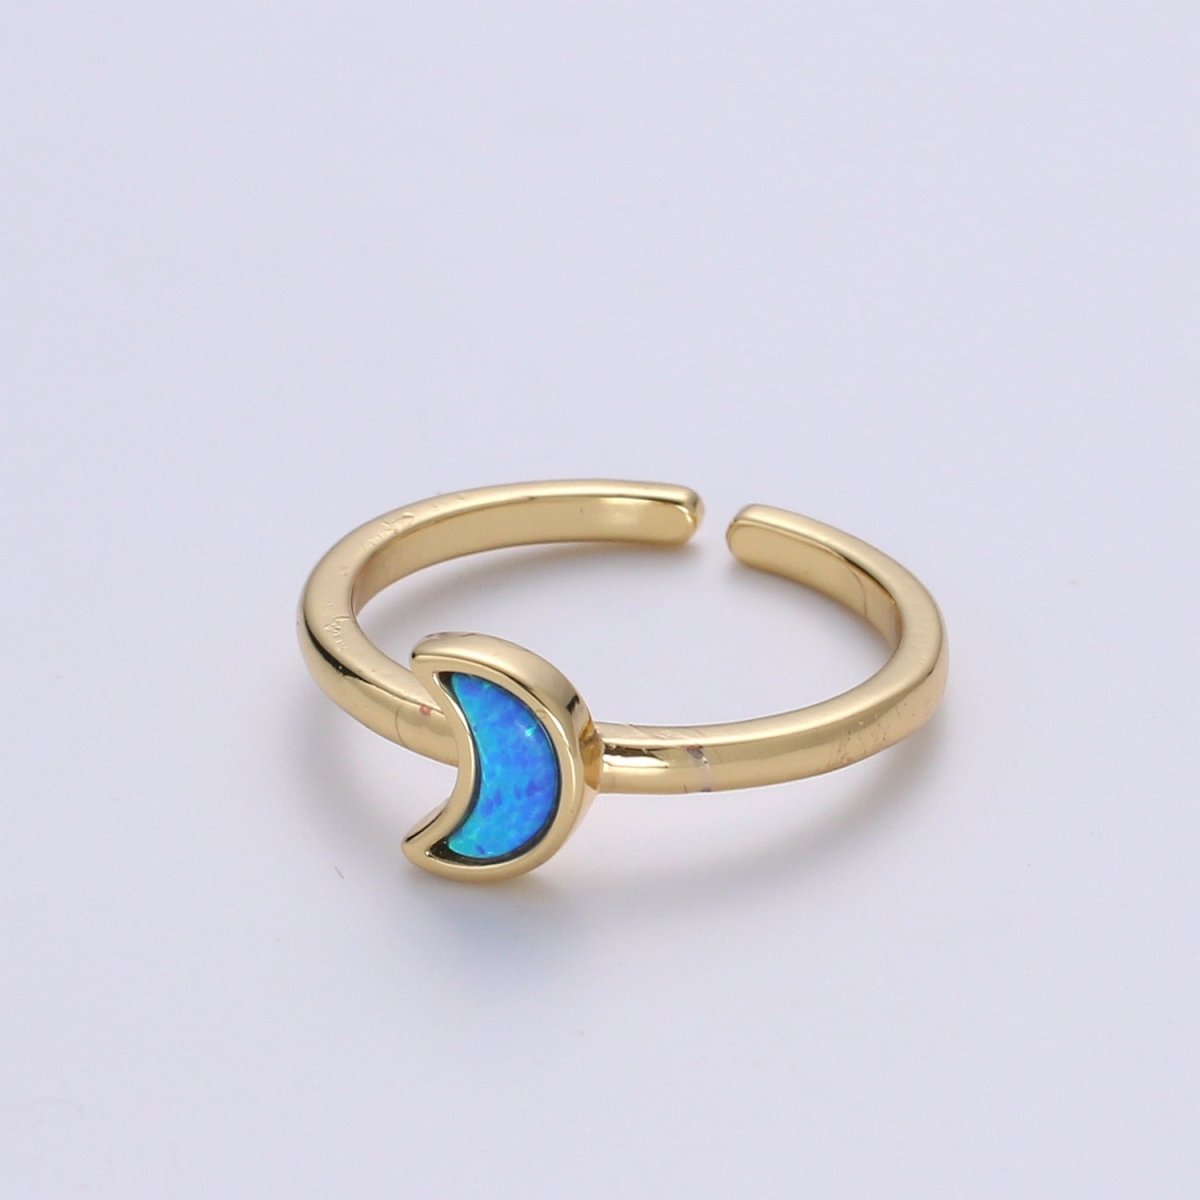 1pc 24K Gold Opal Simulated Ring,Cresent Moon Opal Lab Pendant Charm Ring, Solitaire White Opal Lab Celestial Design Band Jewelry R532 - DLUXCA